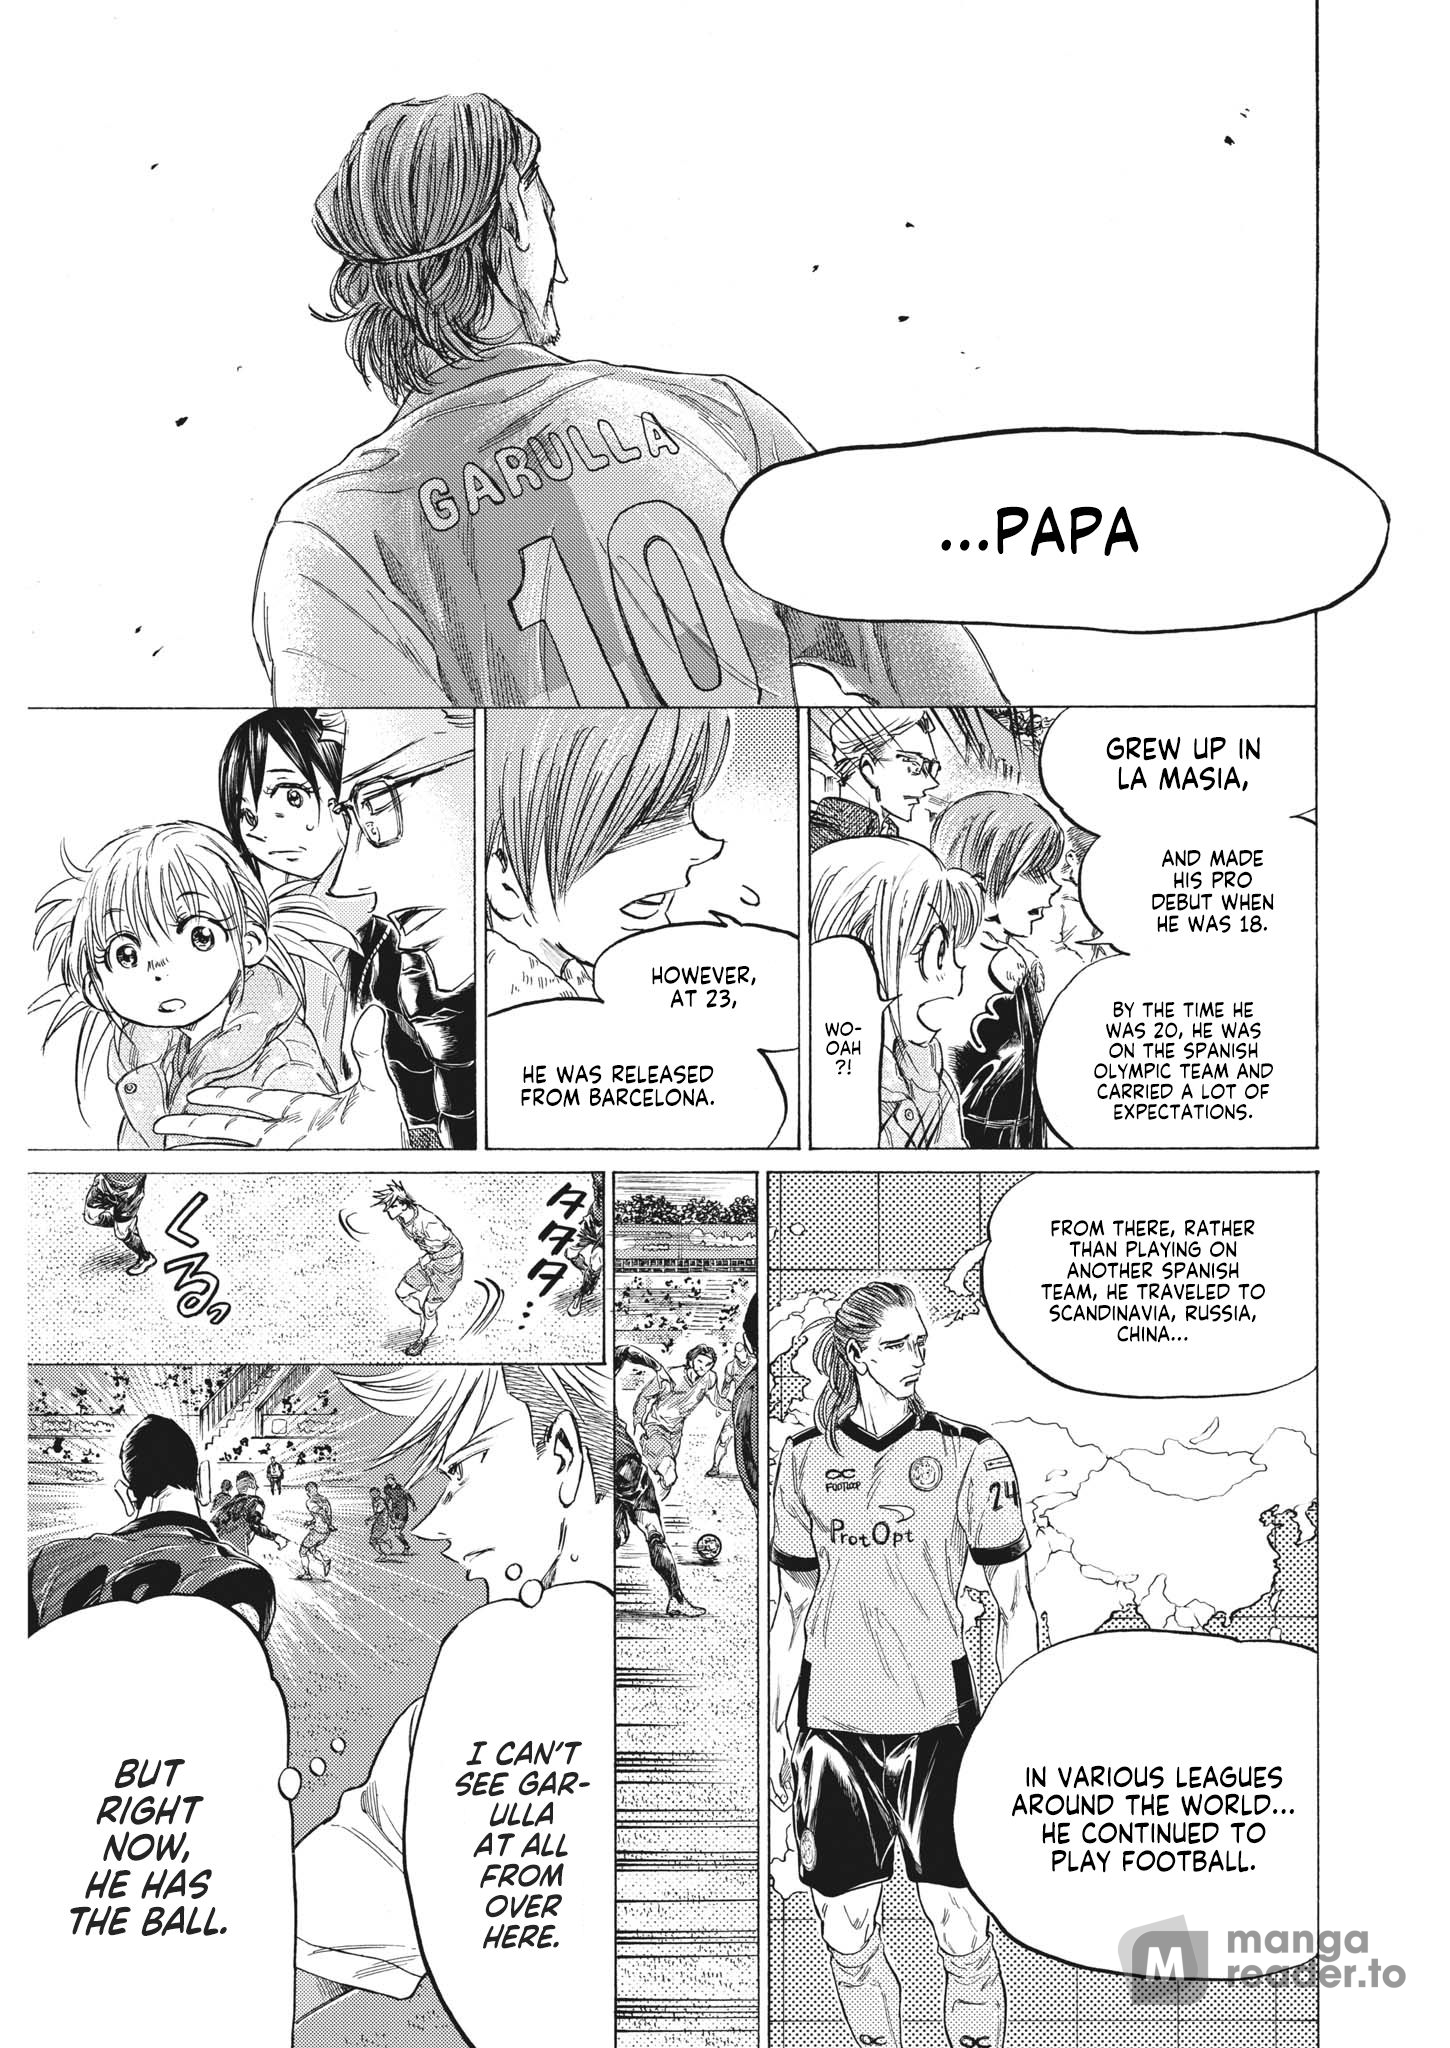 Ao Ashi, Chapter 325  TcbScans Org - Free Manga Online in High Quality